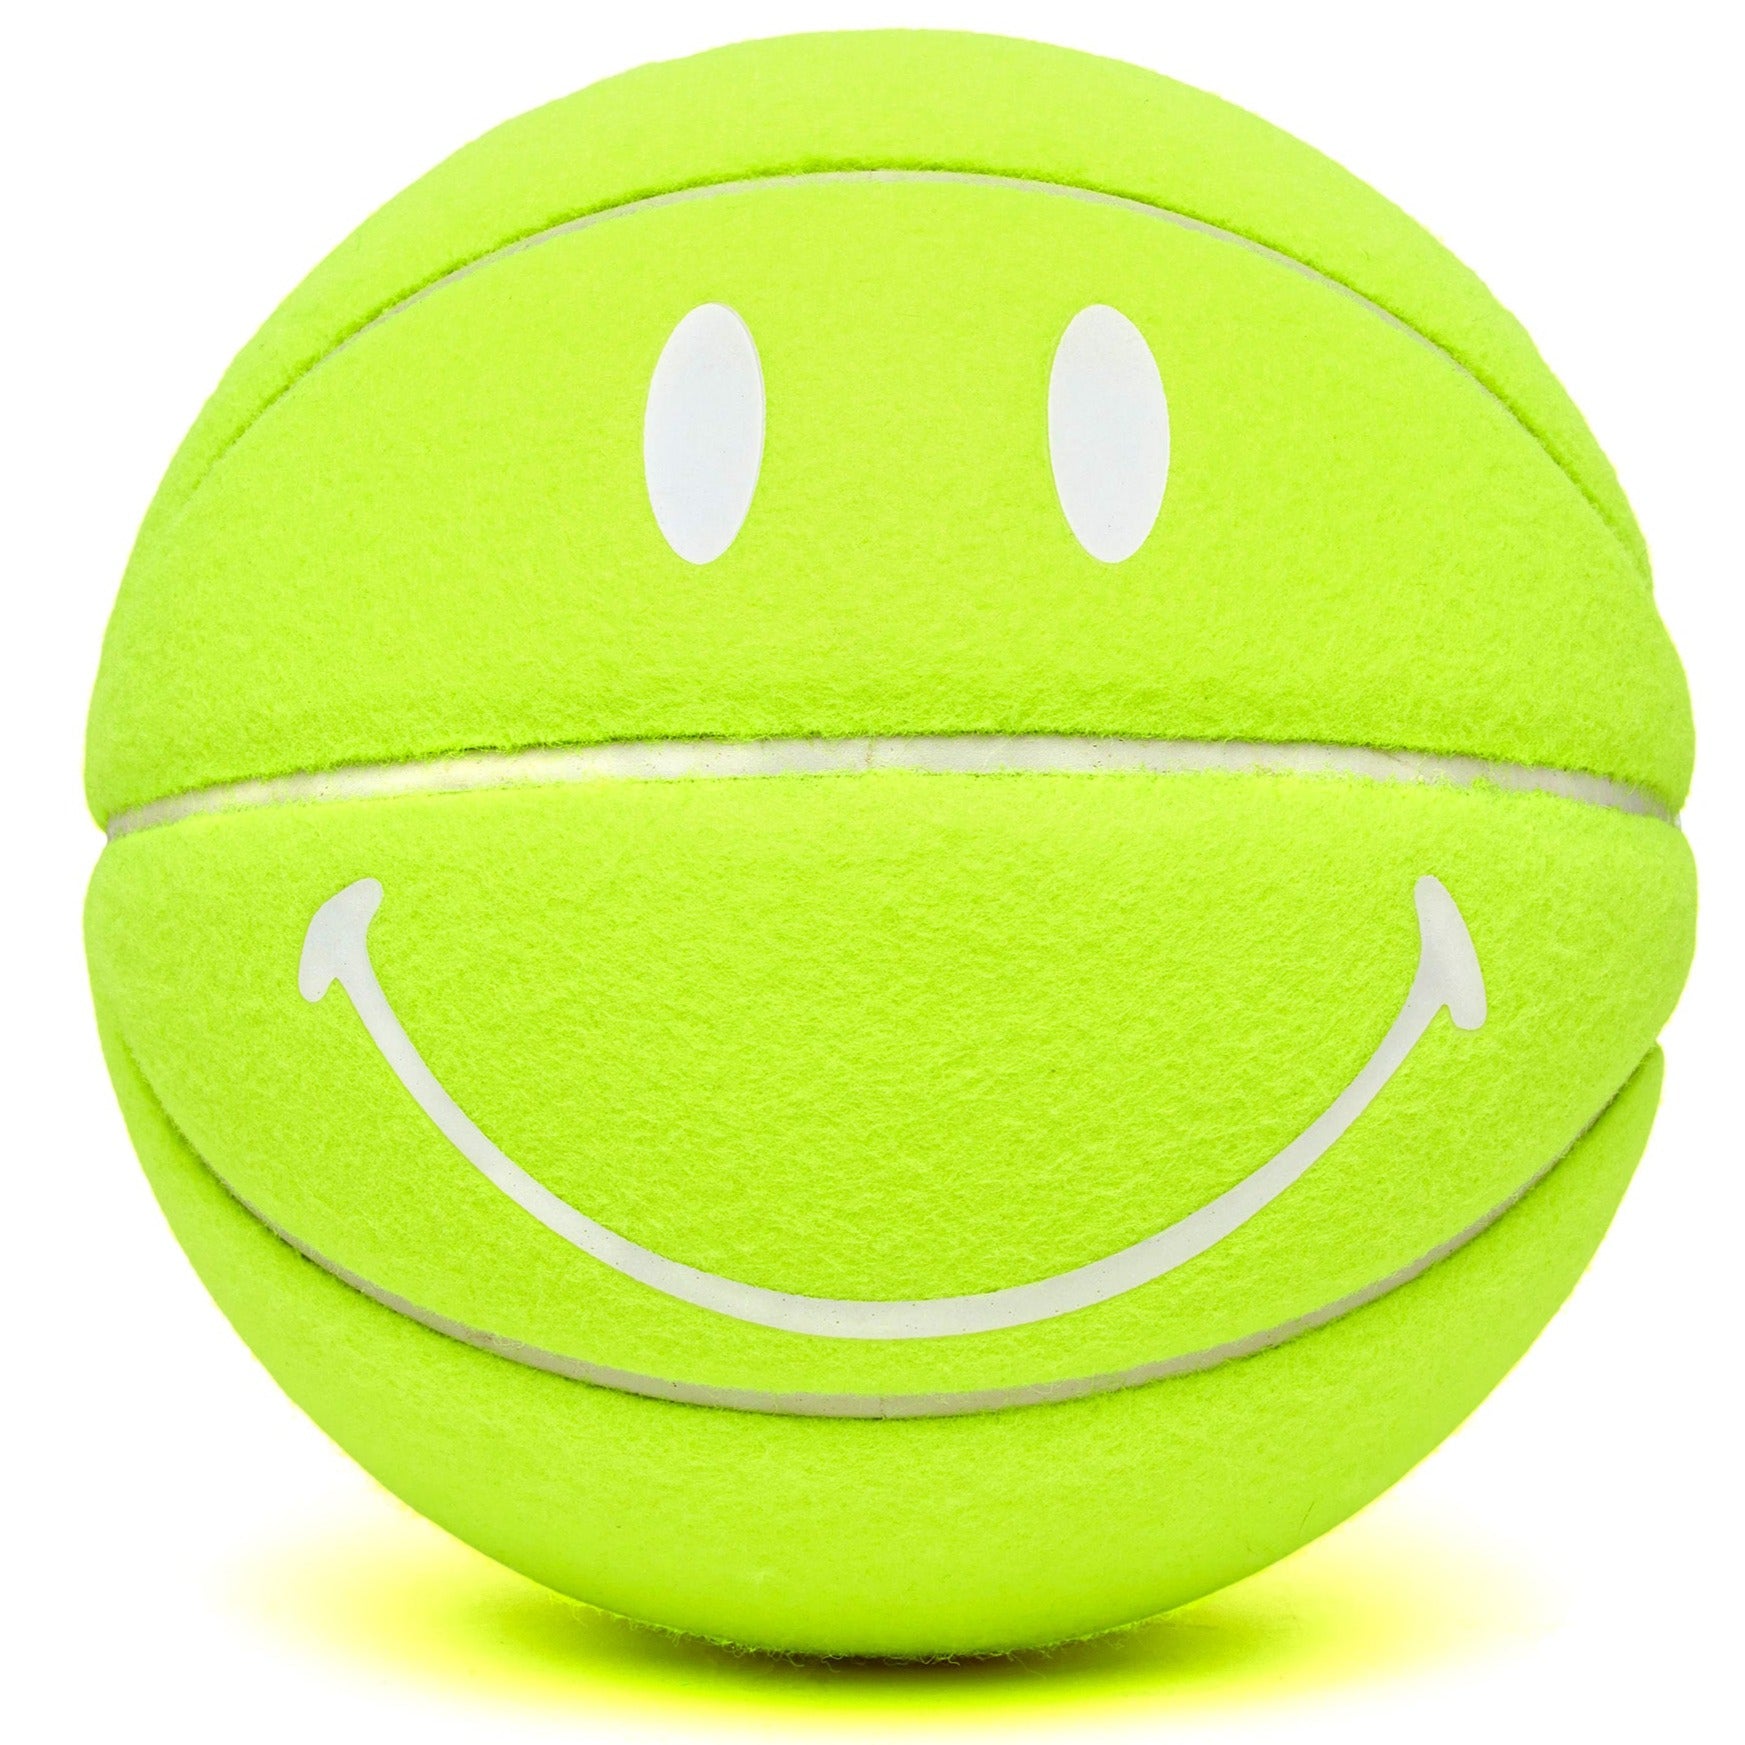 MARKET clothing brand SMILEY TENNIS BASKETBALL. Find more basketballs, sporting goods, homegoods and graphic tees at MarketStudios.com. Formally Chinatown Market.